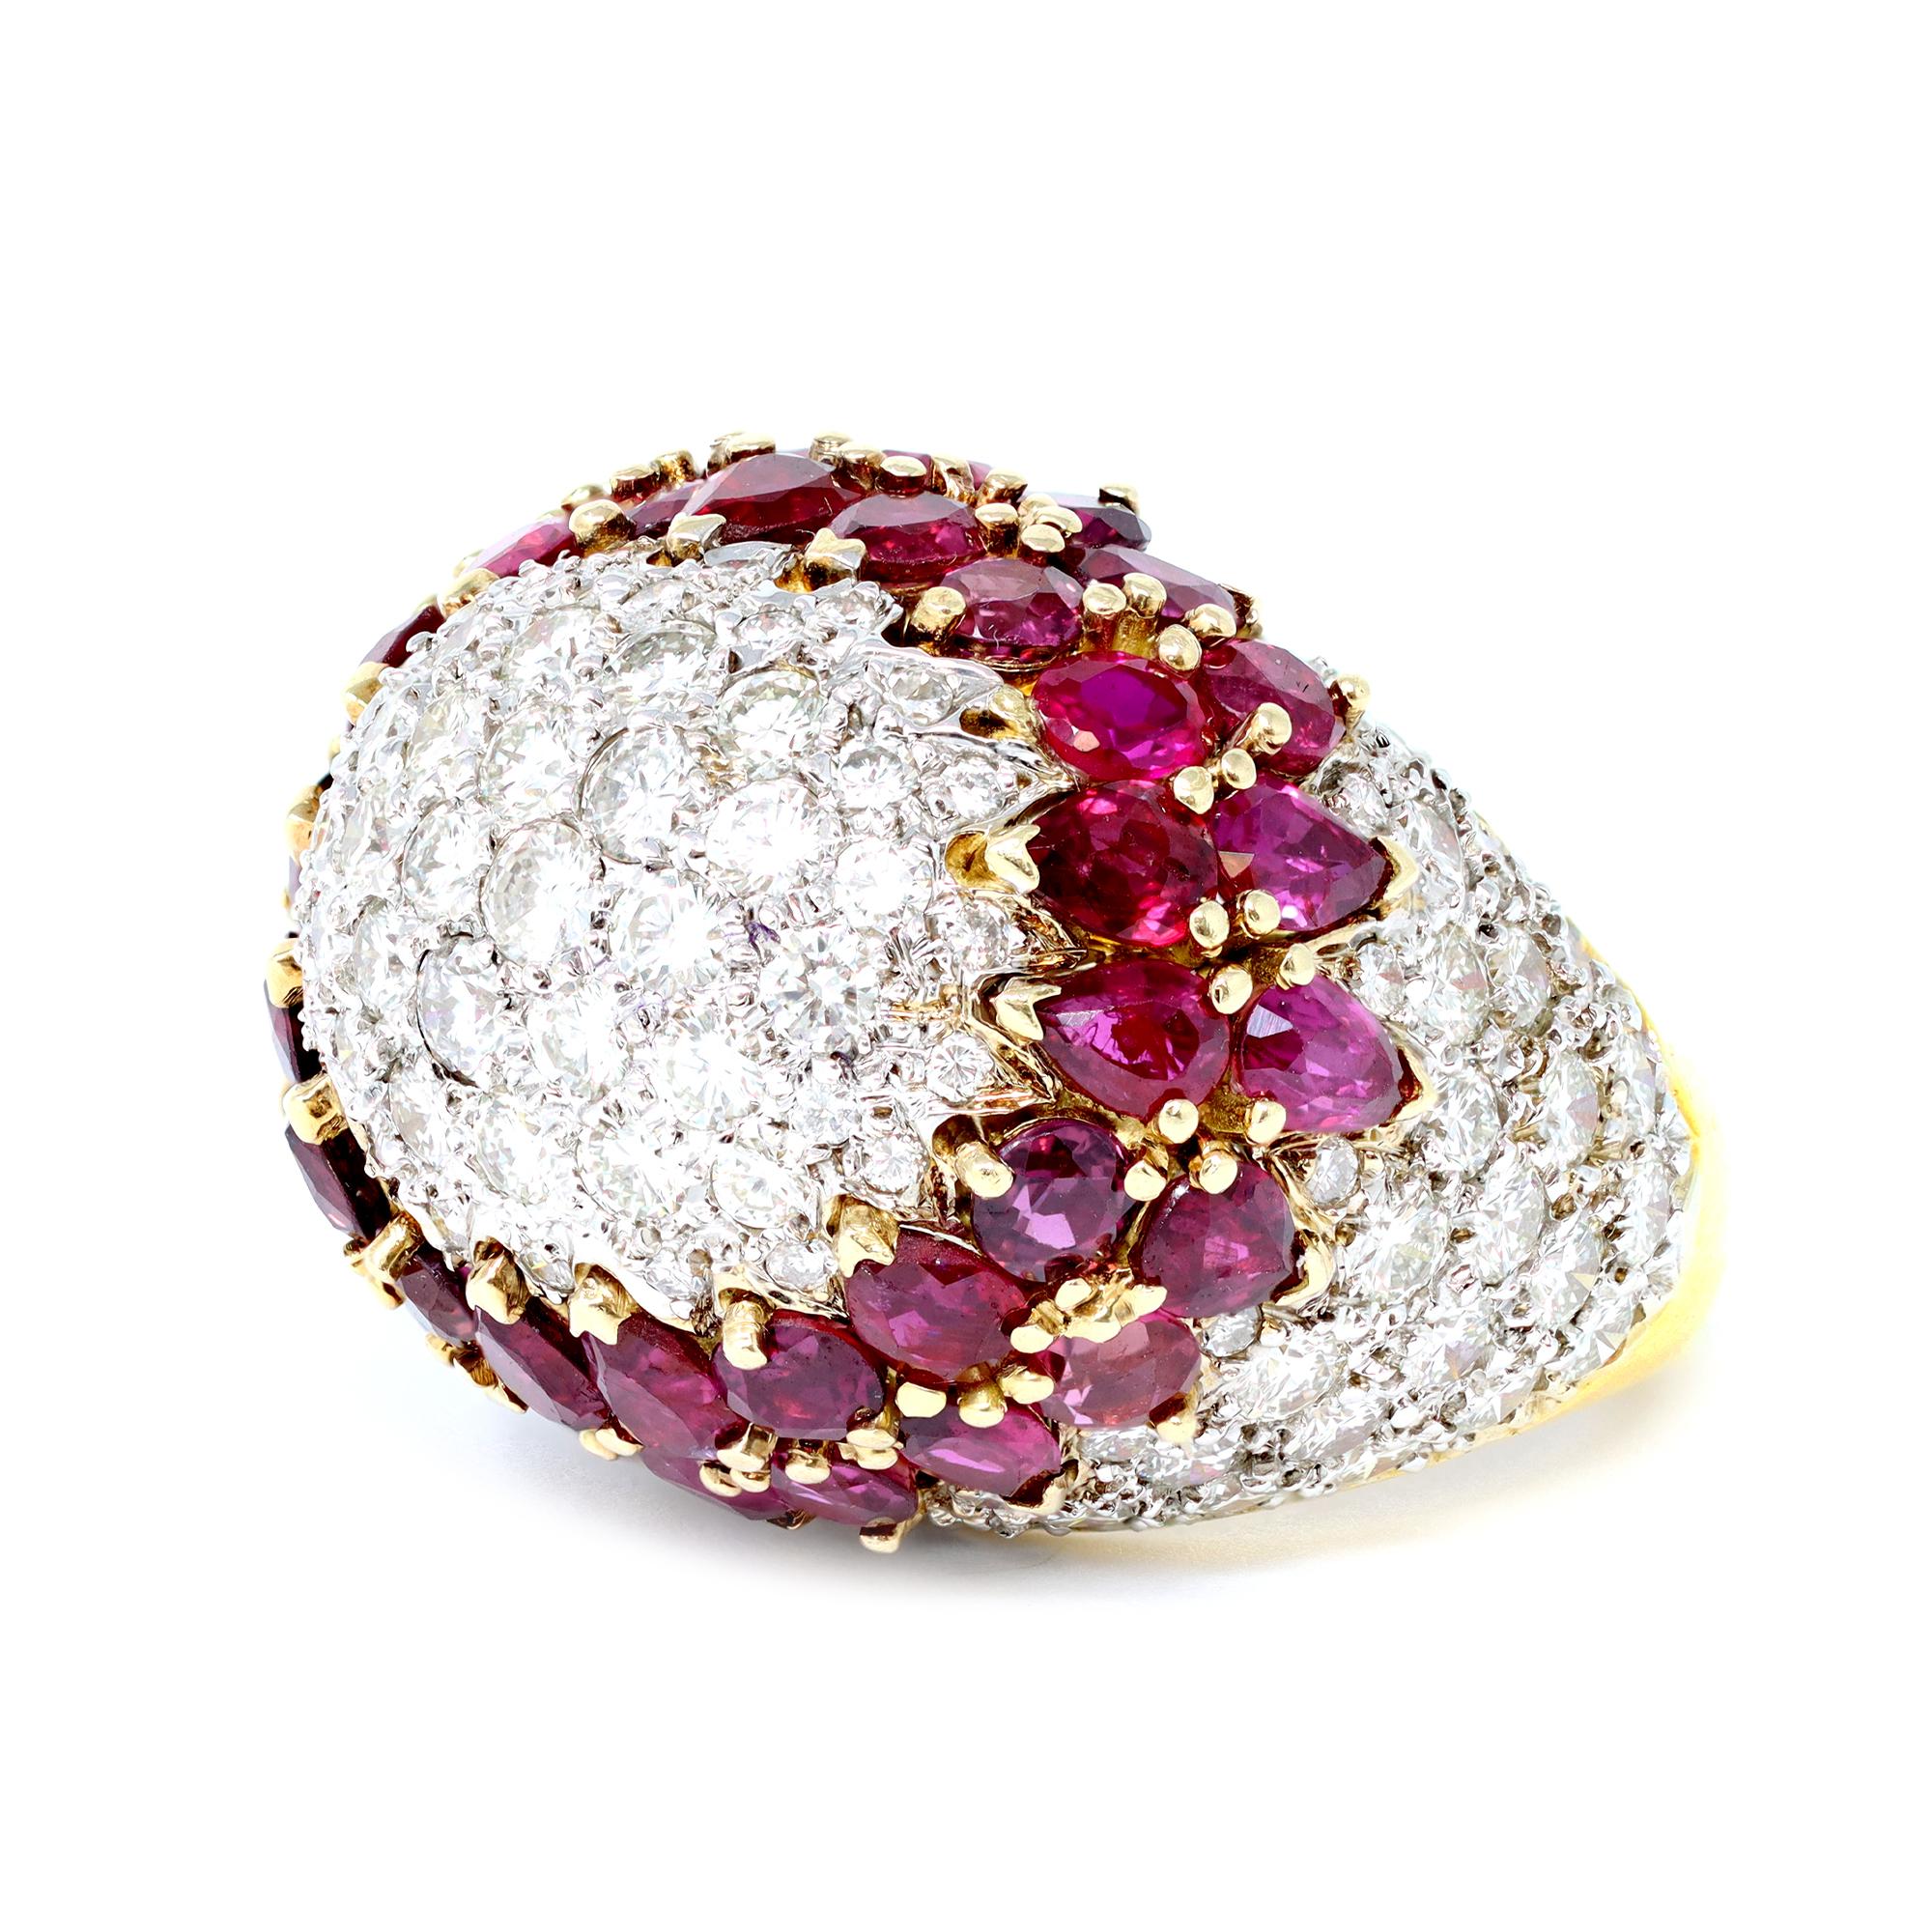 Modern Important Diamond and Ruby Dome Cocktail Ring, circa 1970 For Sale